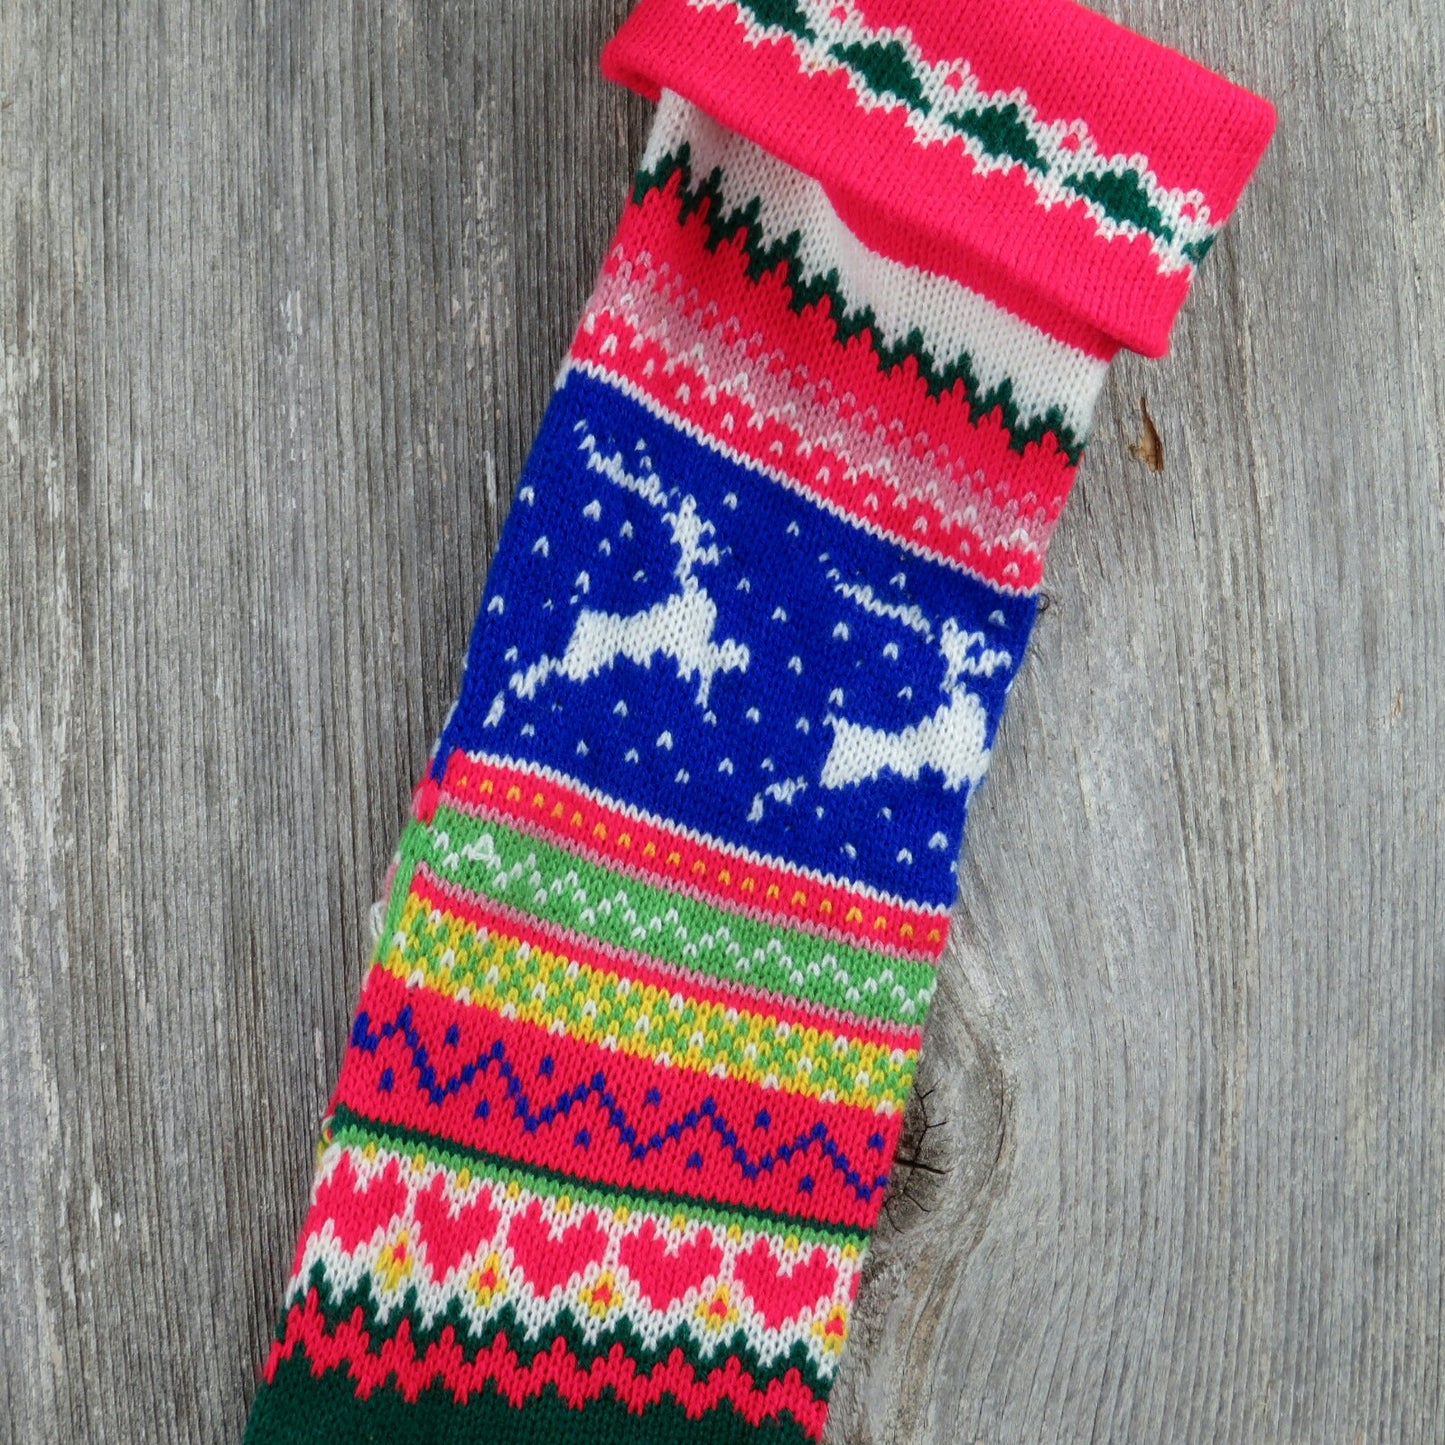 Vintage Reindeer Stocking Striped Hearts Sweater Christmas Red Green Blue Pink Nordic 80s - At Grandma's Table